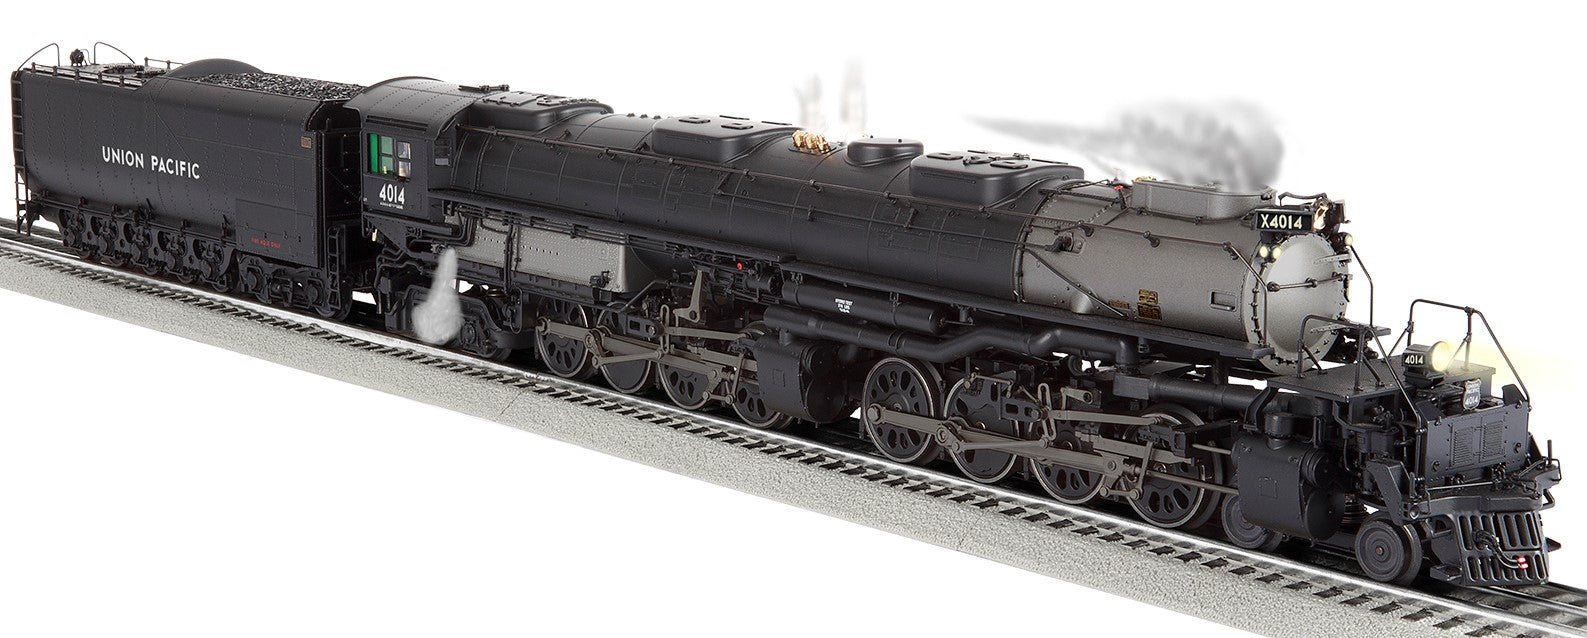 The VISION LINE Class A sounds INCREDIBLE!! #train #modeltrains